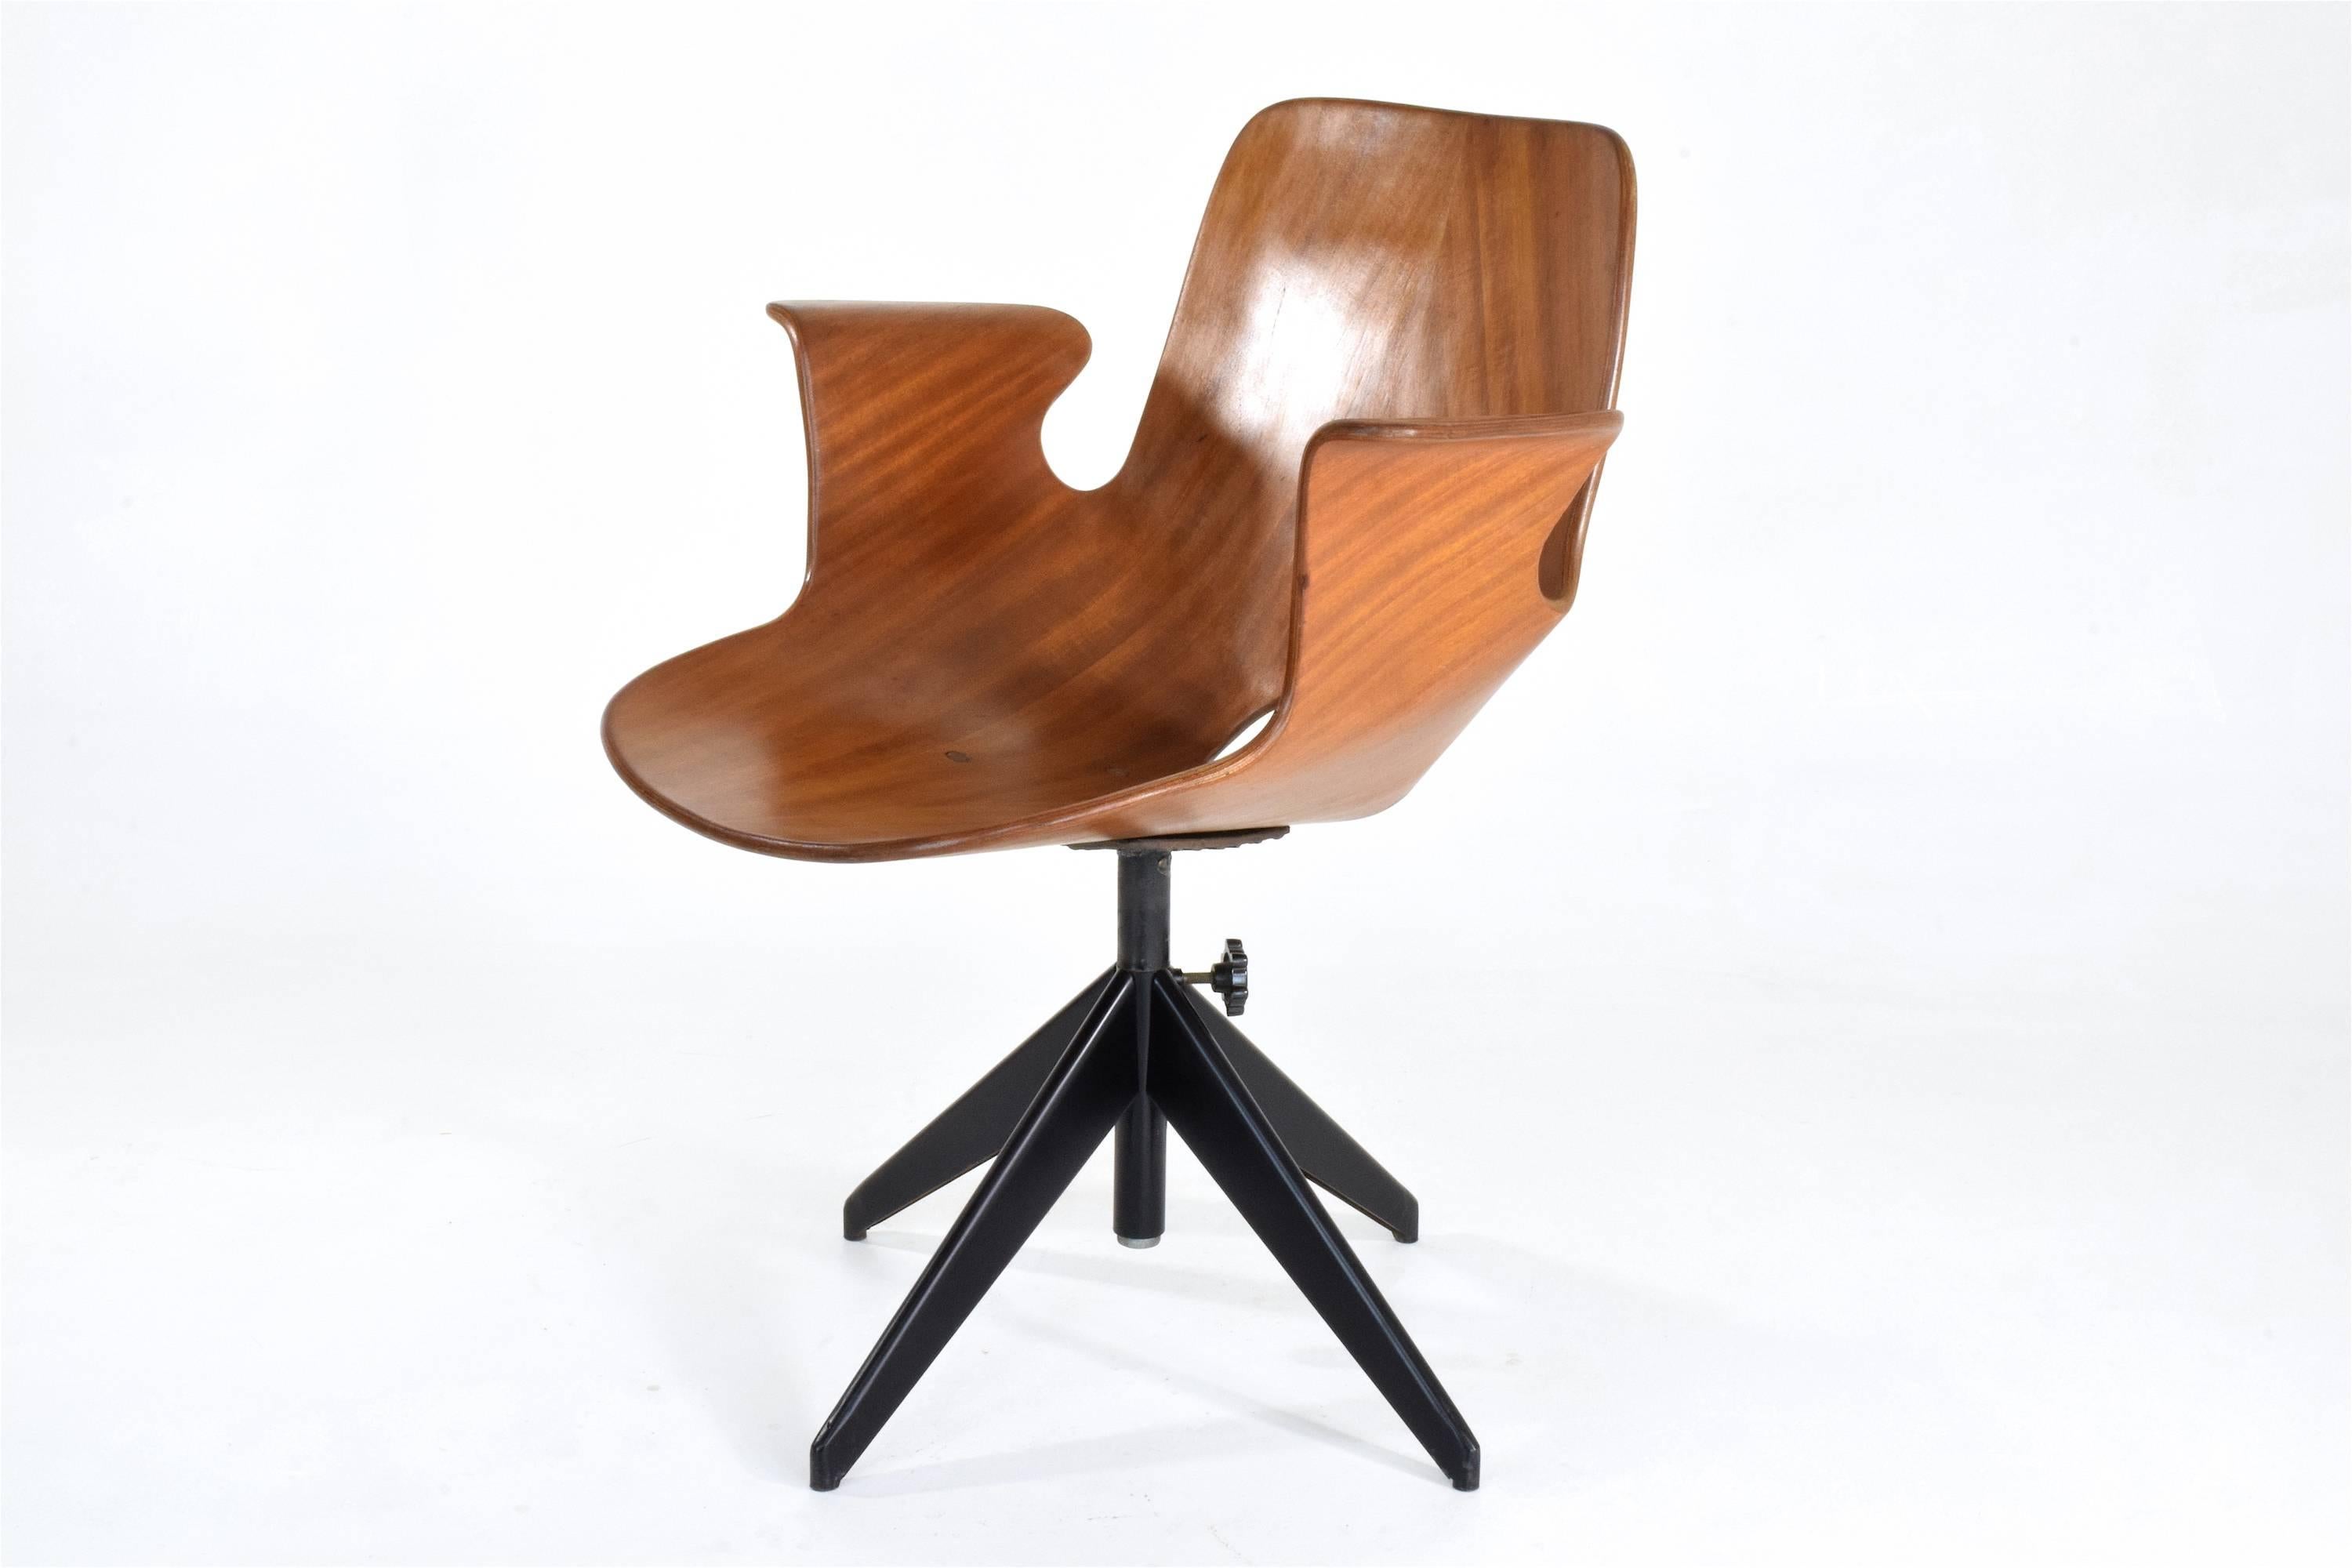 20th century vintage iconic Italian Medea office or desk armchair with rare swivel base, armrests designed by Vittorio Nobili for Fratelli Tagliabue manufactured in Italy, circa 1950s. This model is designed in a curved plywood seat and solid cast